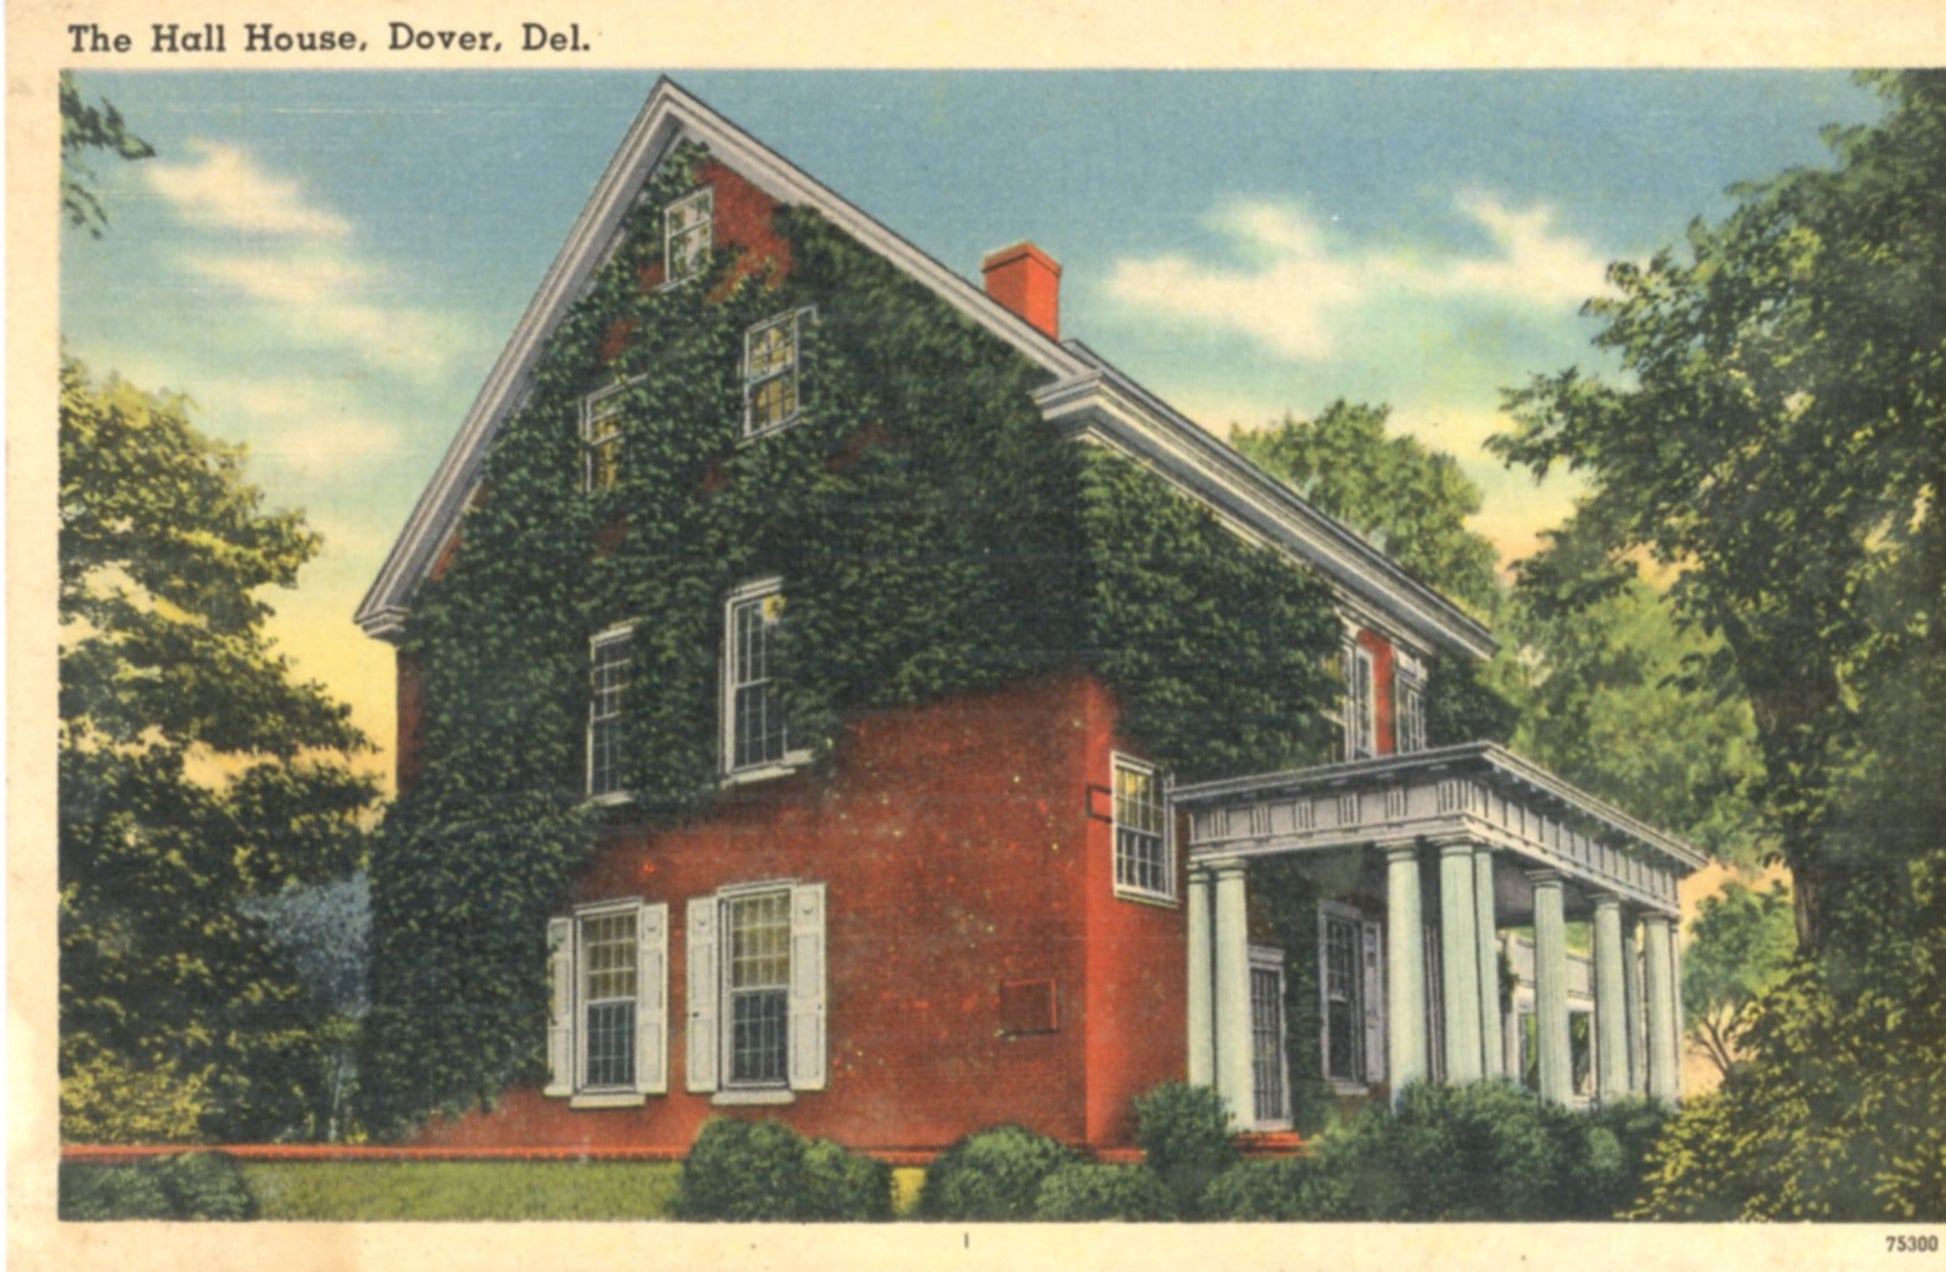 The Hall House DOVER DELAWARE "Now Woodburn" Vintage Linen Postcard Circa 1930 - 1945